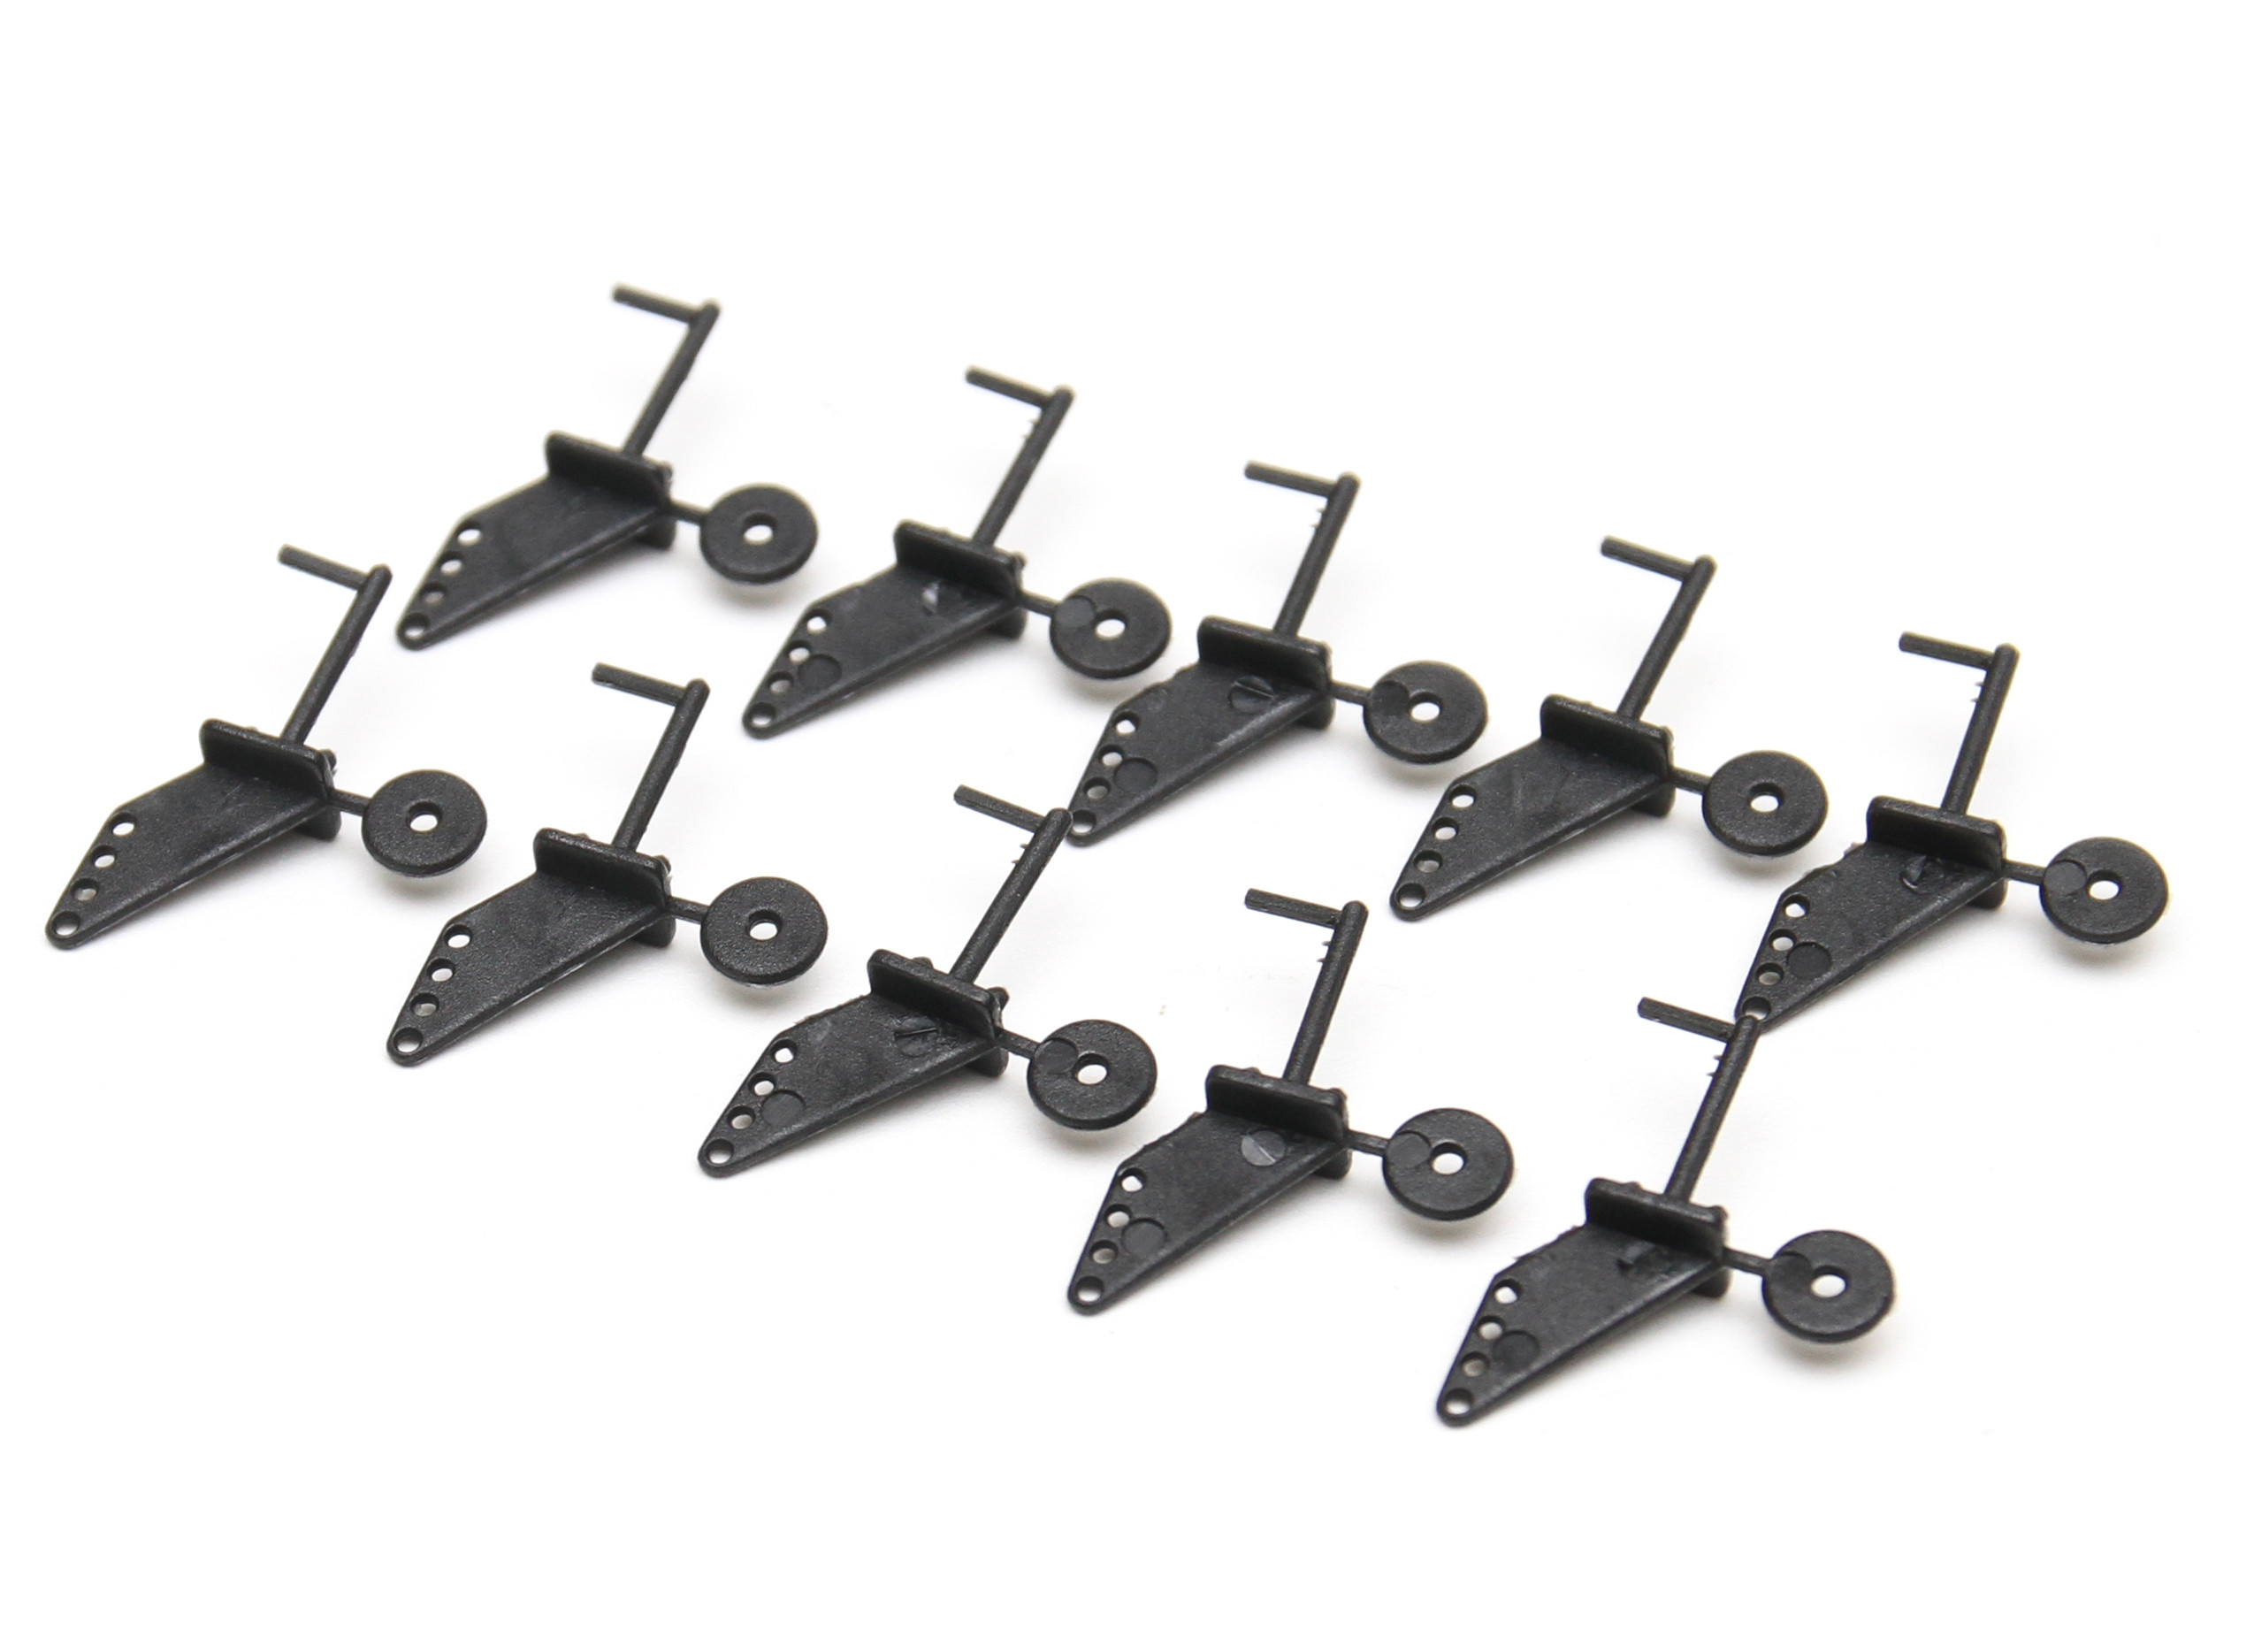 20pc Plastic Pinned Hinges for RC Aircraft Hobby Model Plane Lipo Battery